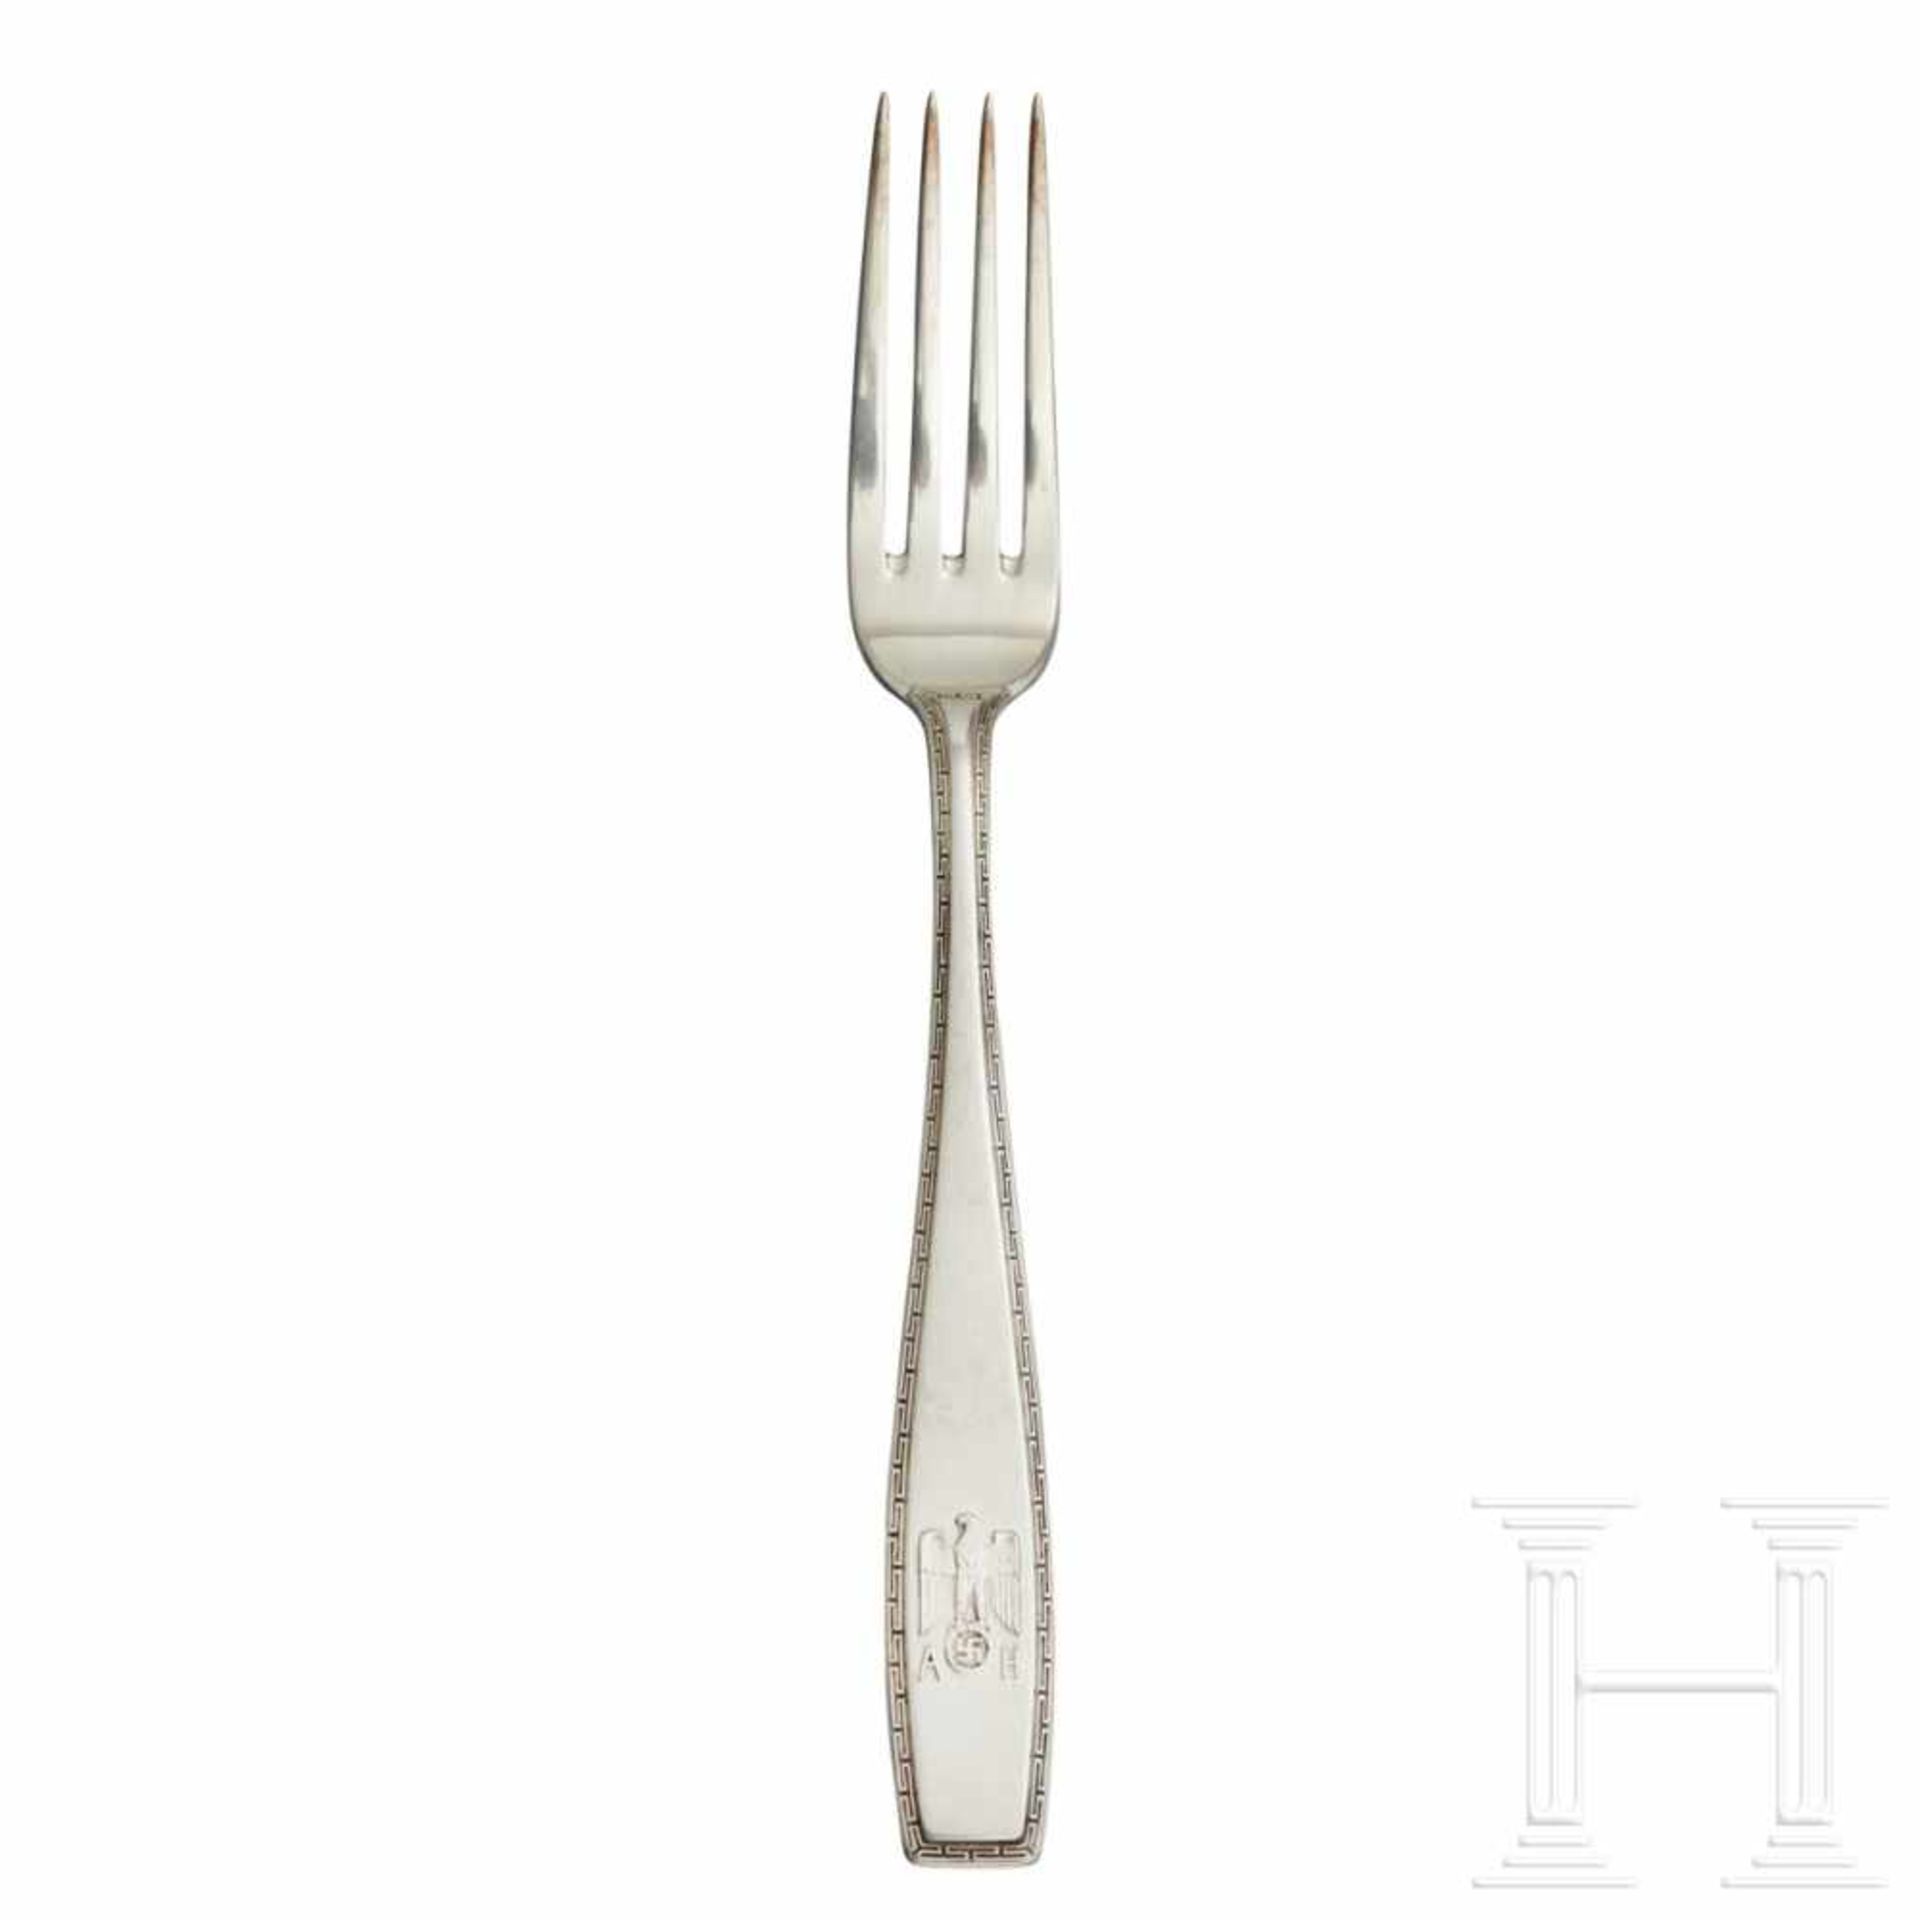 Adolf Hitler – a Dessert Fork from his Personal Silver ServiceSo called “formal pattern” with raised